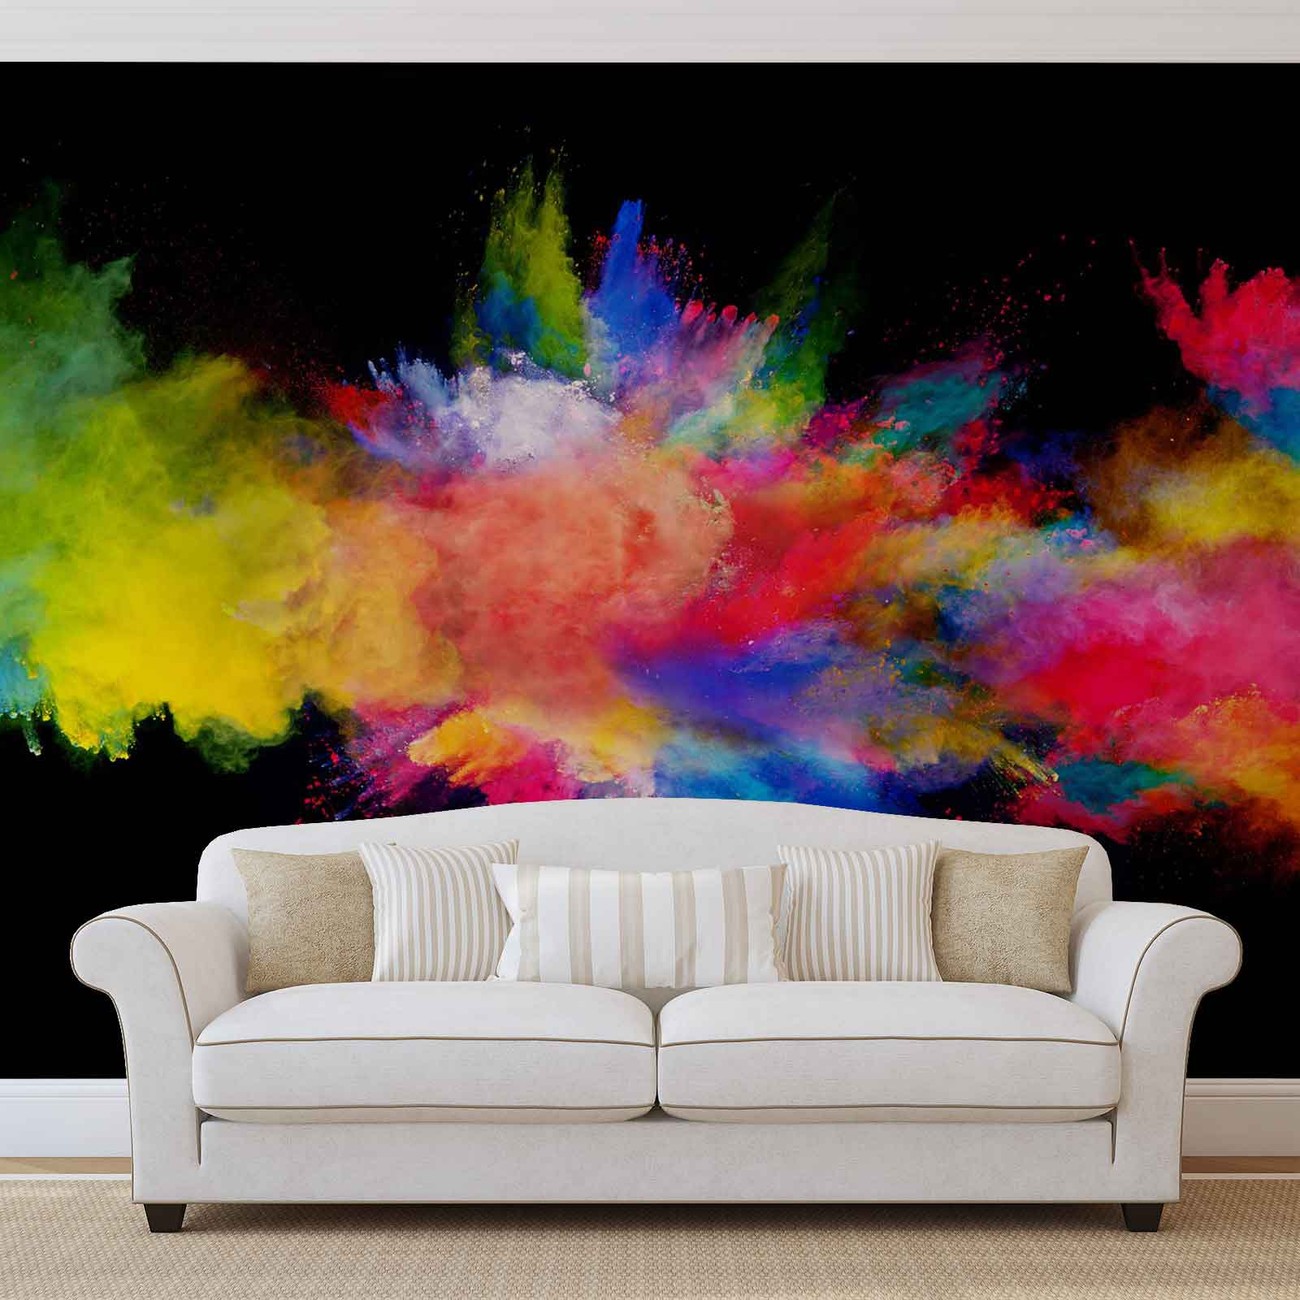 Colour Explosion Buy | Wall Paper Mural at EuroPosters